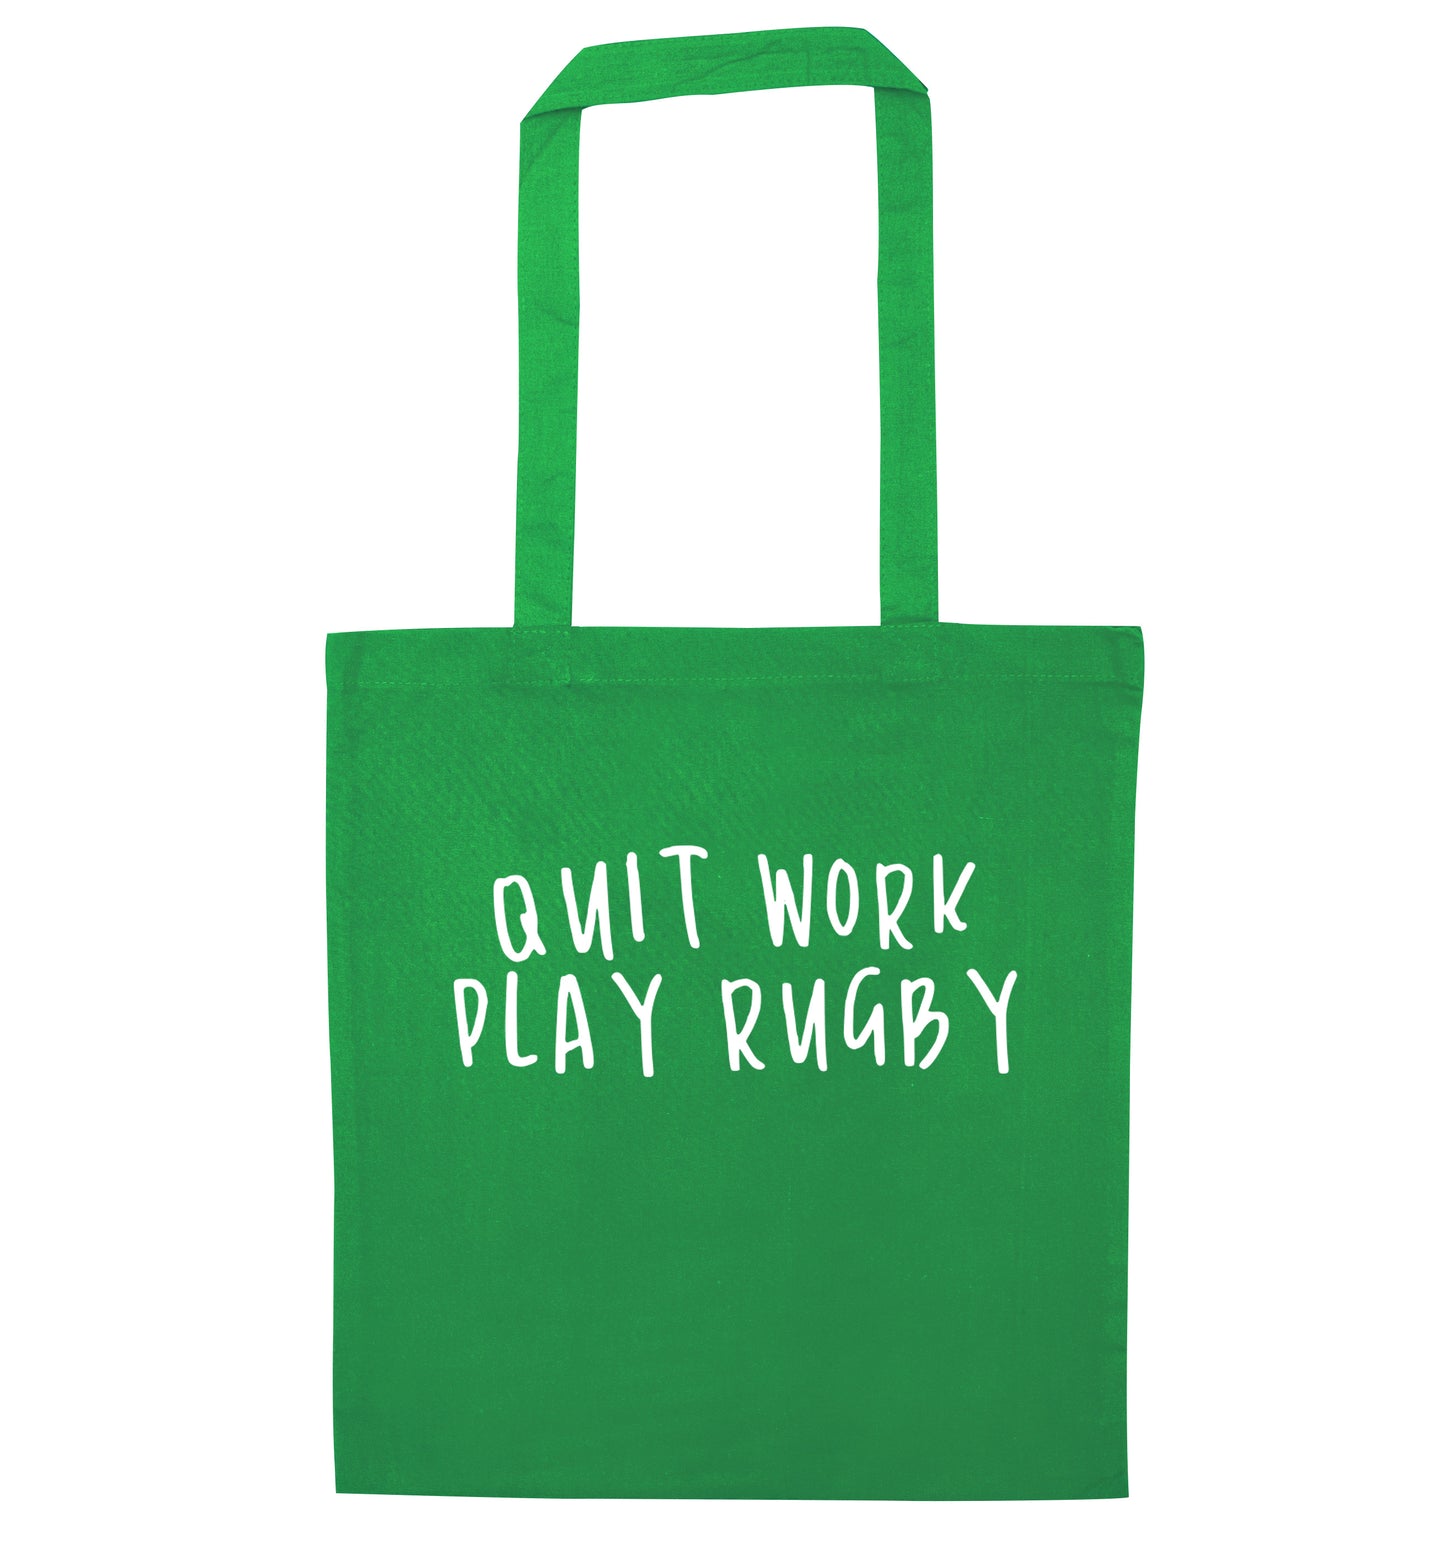 Quit work play rugby green tote bag